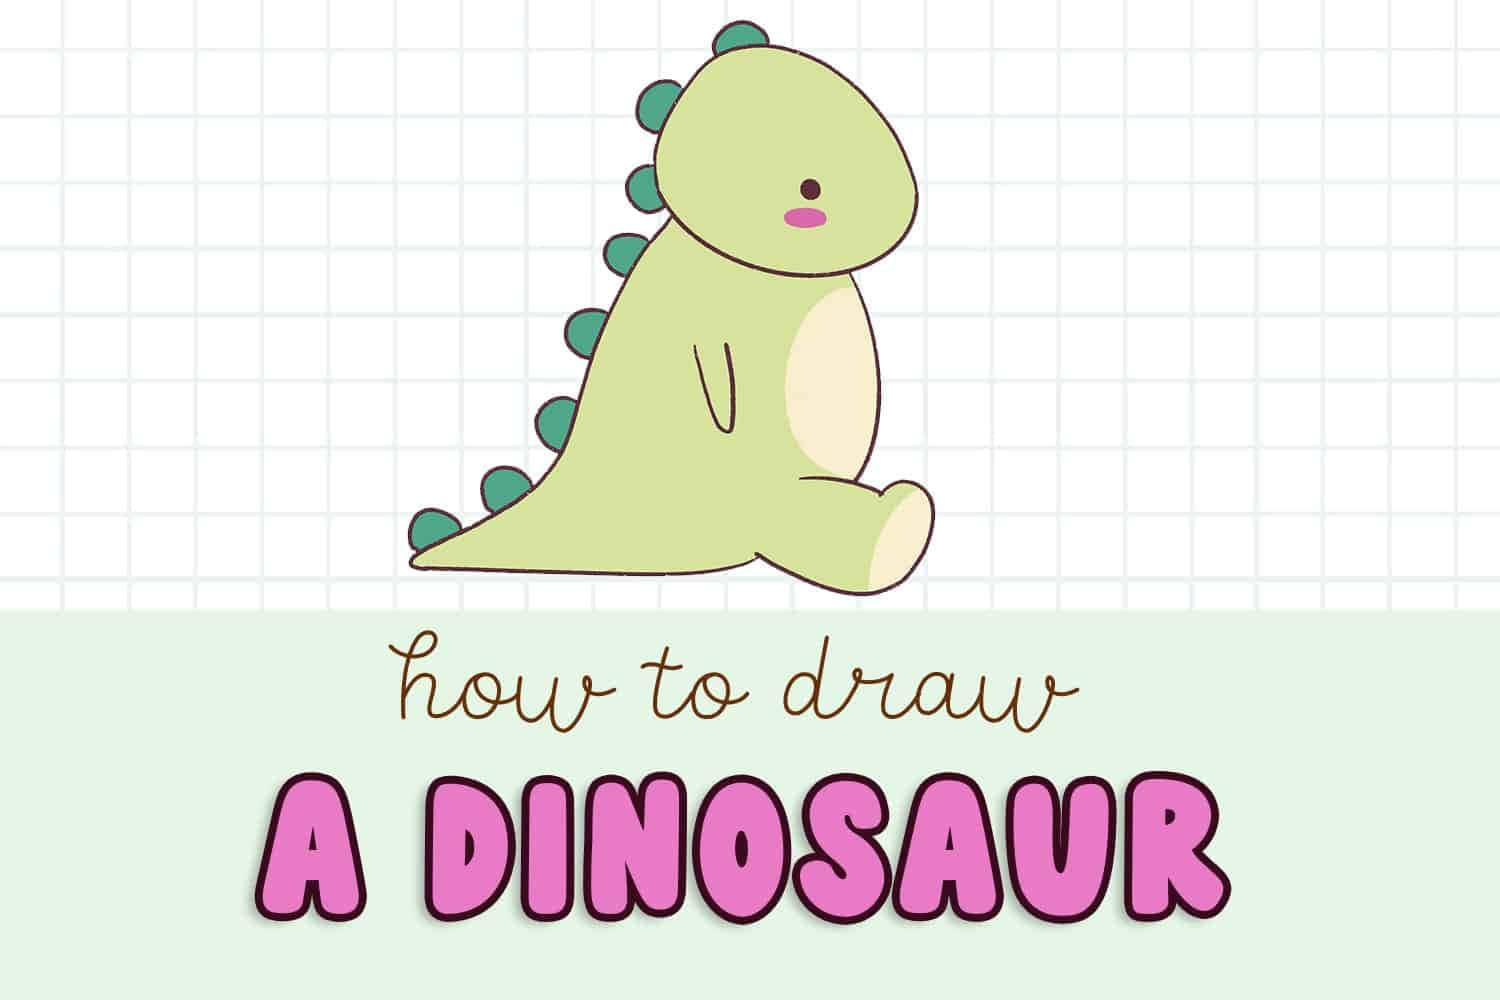 Cute little dinosaur drawing of a green Apatosaurus and a red Stegosaurus